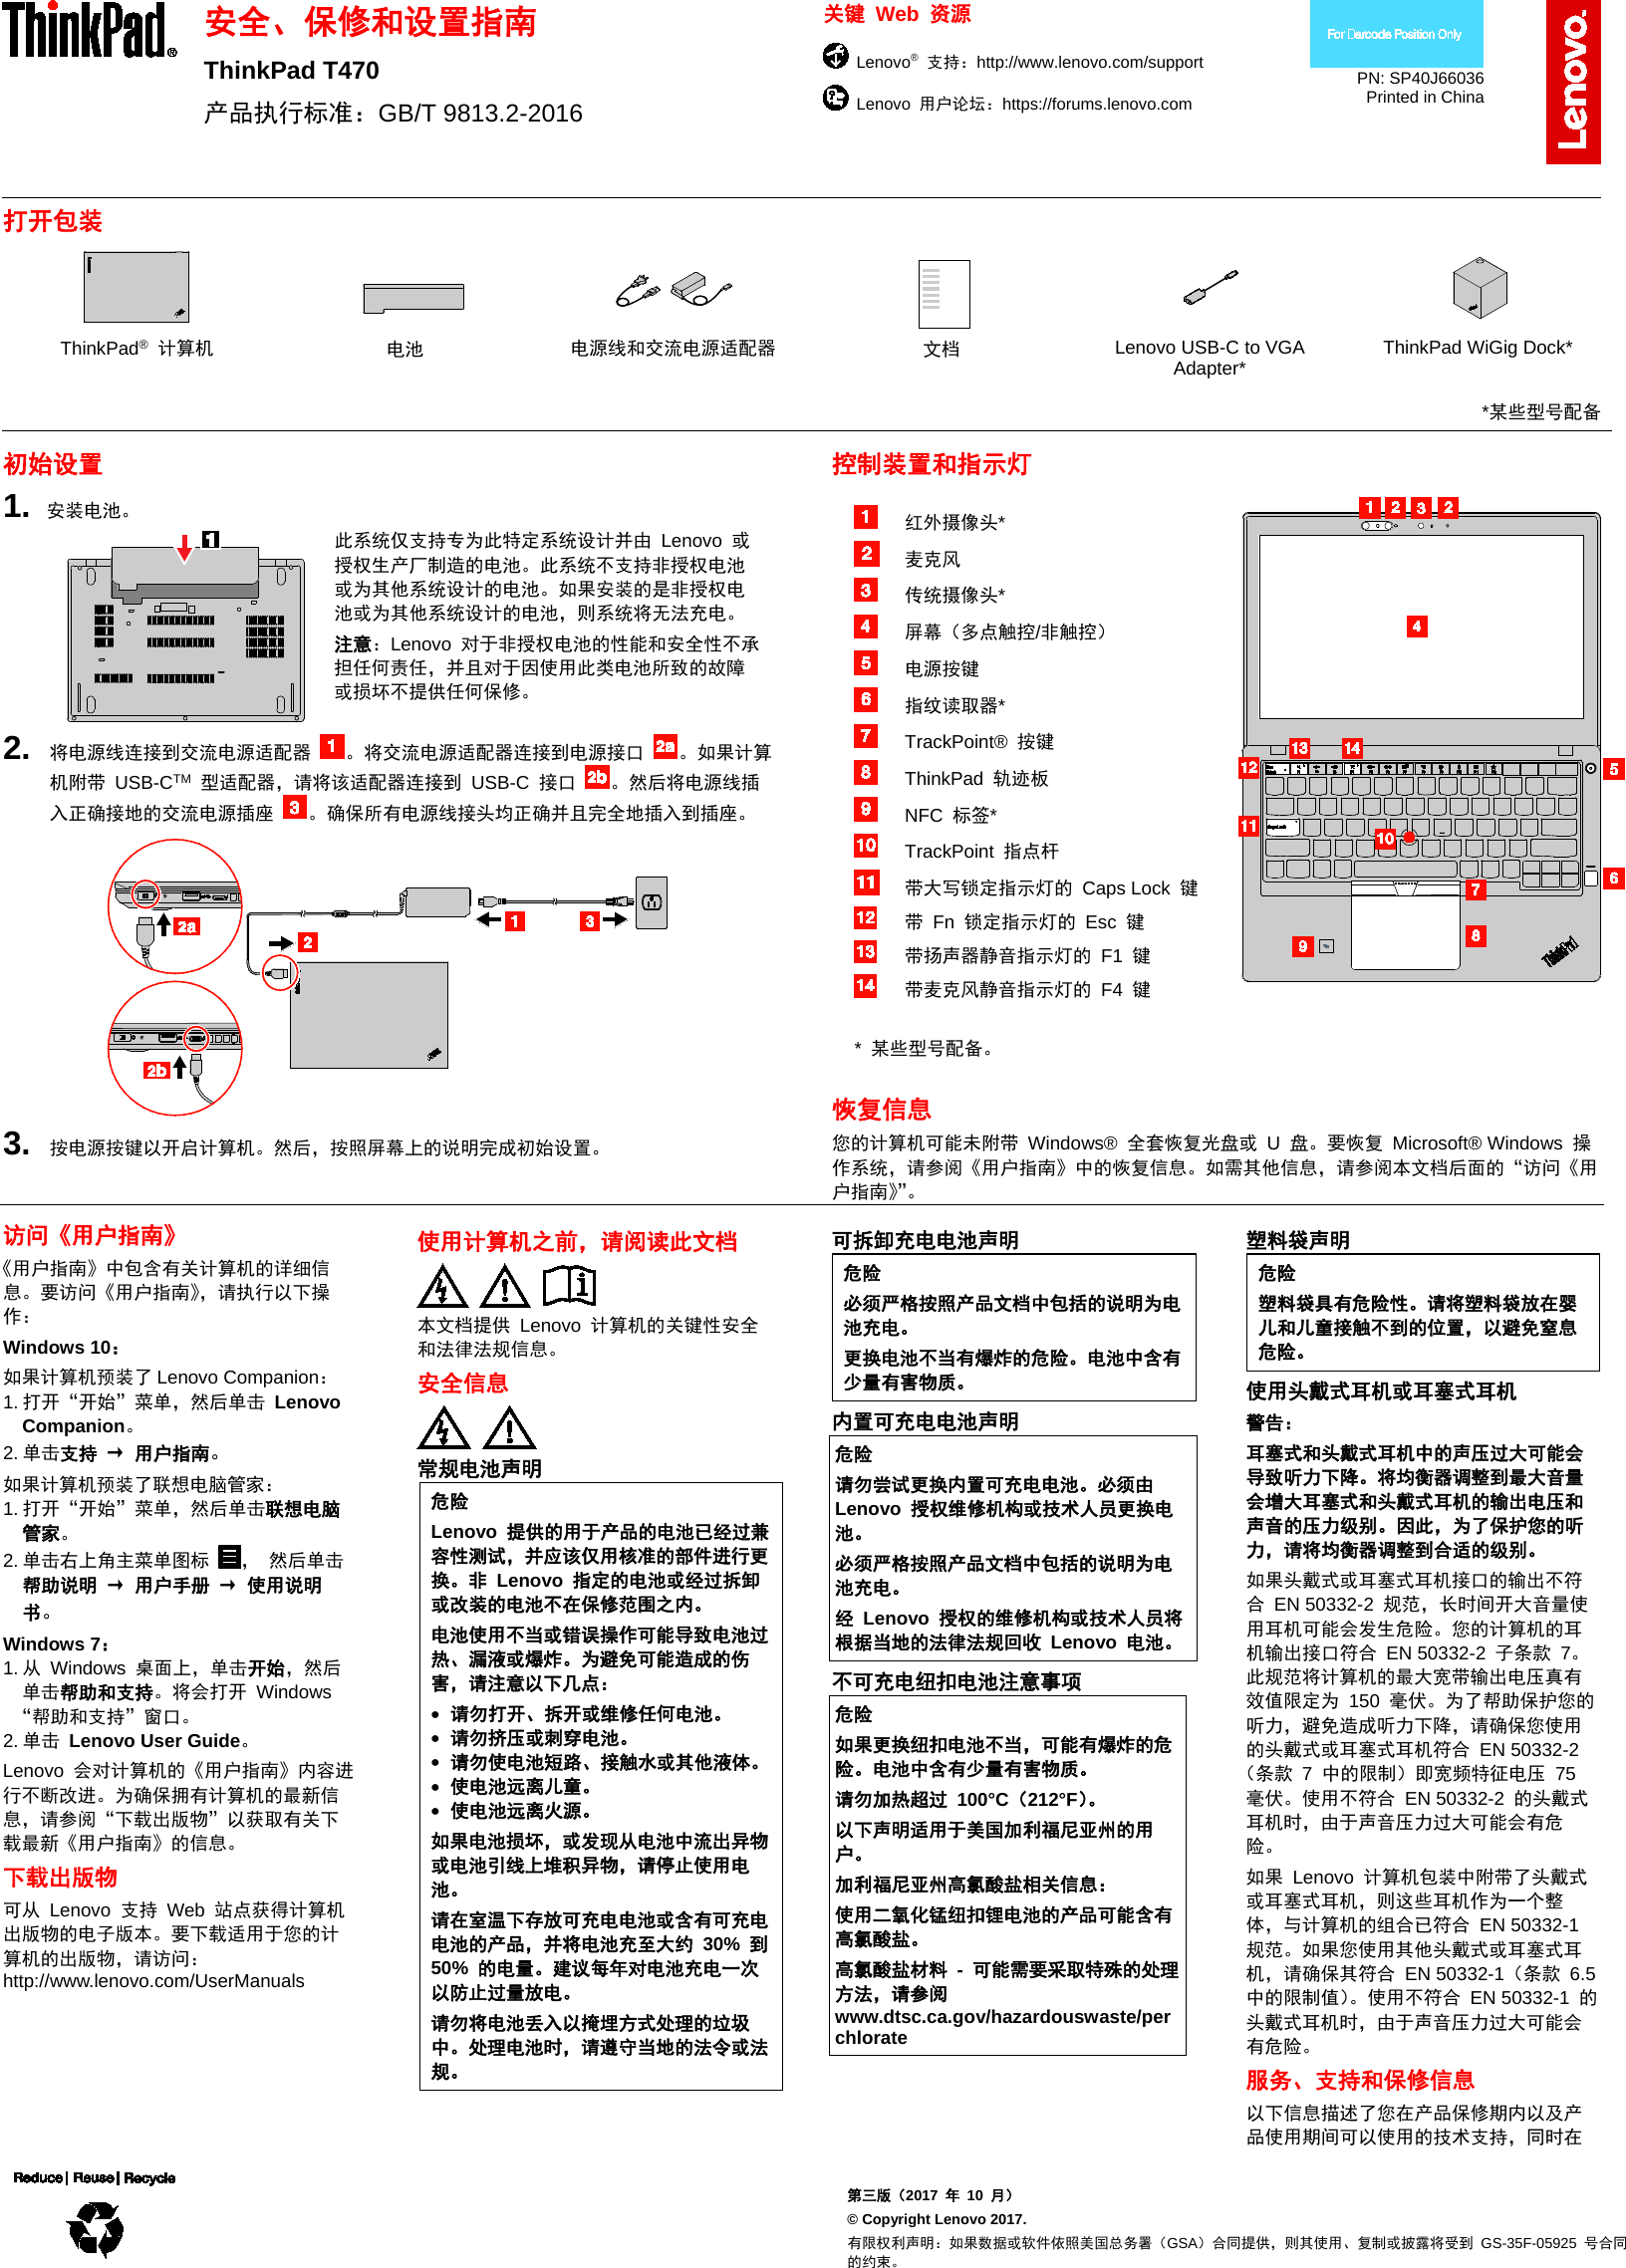 Page 1 of 2 - Lenovo T470 Swsg Zh-Cn First Edition 使用手册 (Simplified Chinese) Safety, Warranty And Setup Guide - Think Pad (Type 20HD, 20HE) Laptop (Think Pad)